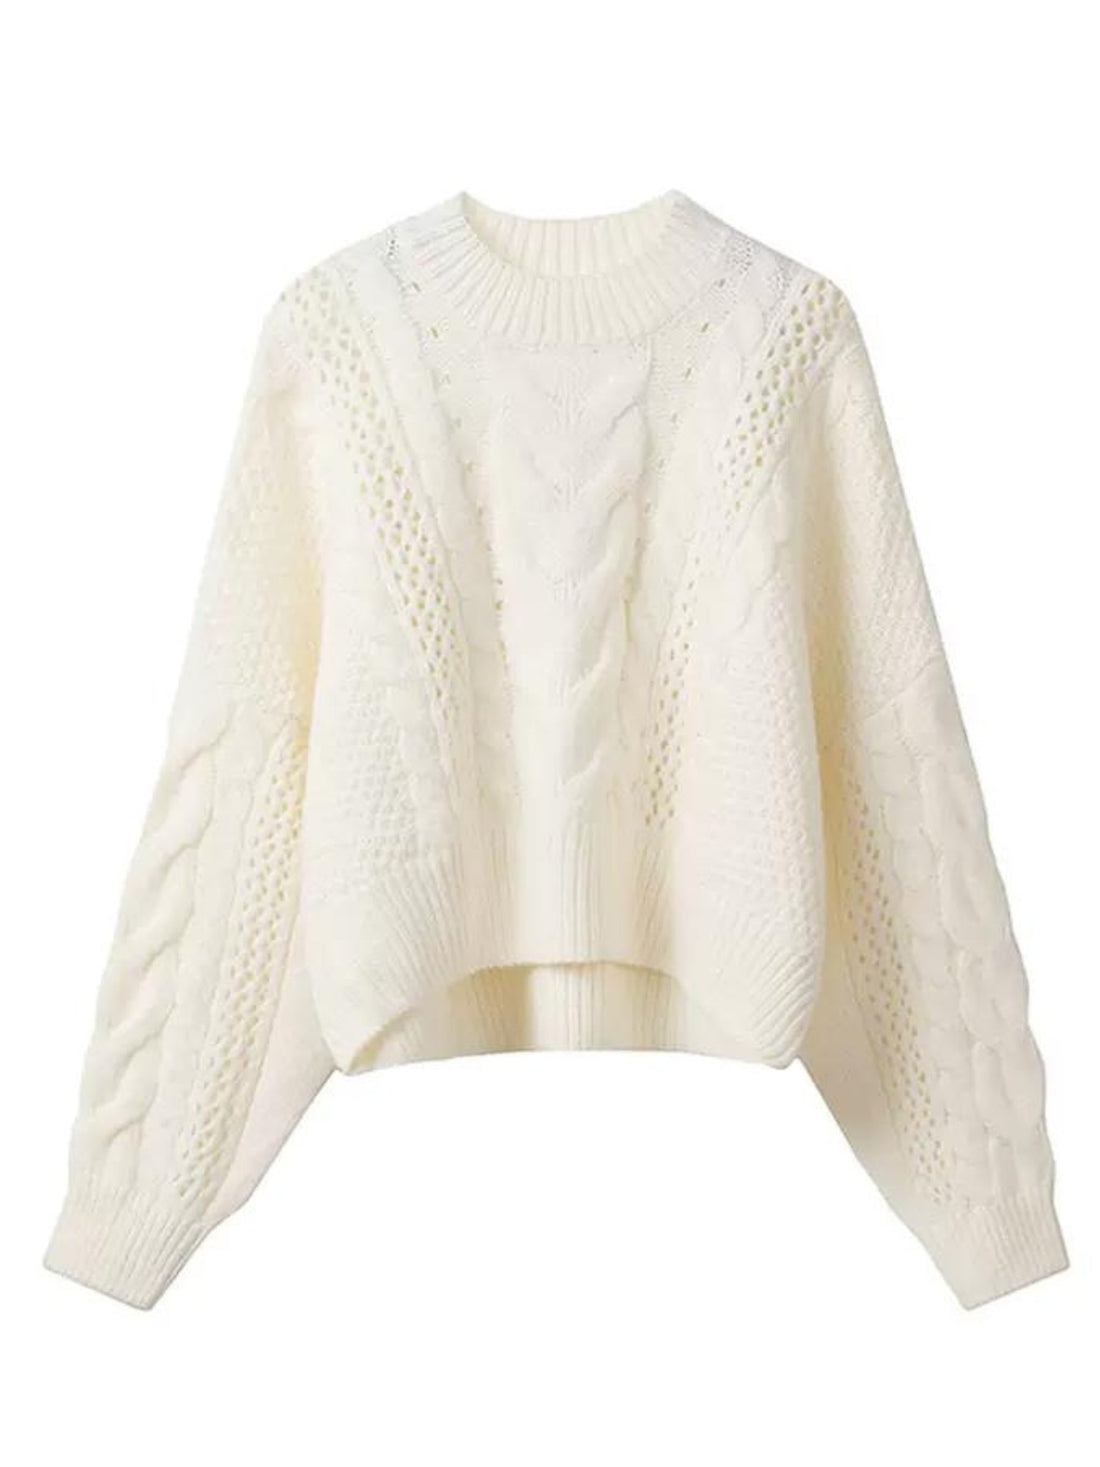 LaPose Fashion - Lyanna Knitted Sweater - Knitted Tops, Long Sleeve Tops, Oversize Tops, Tops, Tops/Sweatshirts, Warm Tops